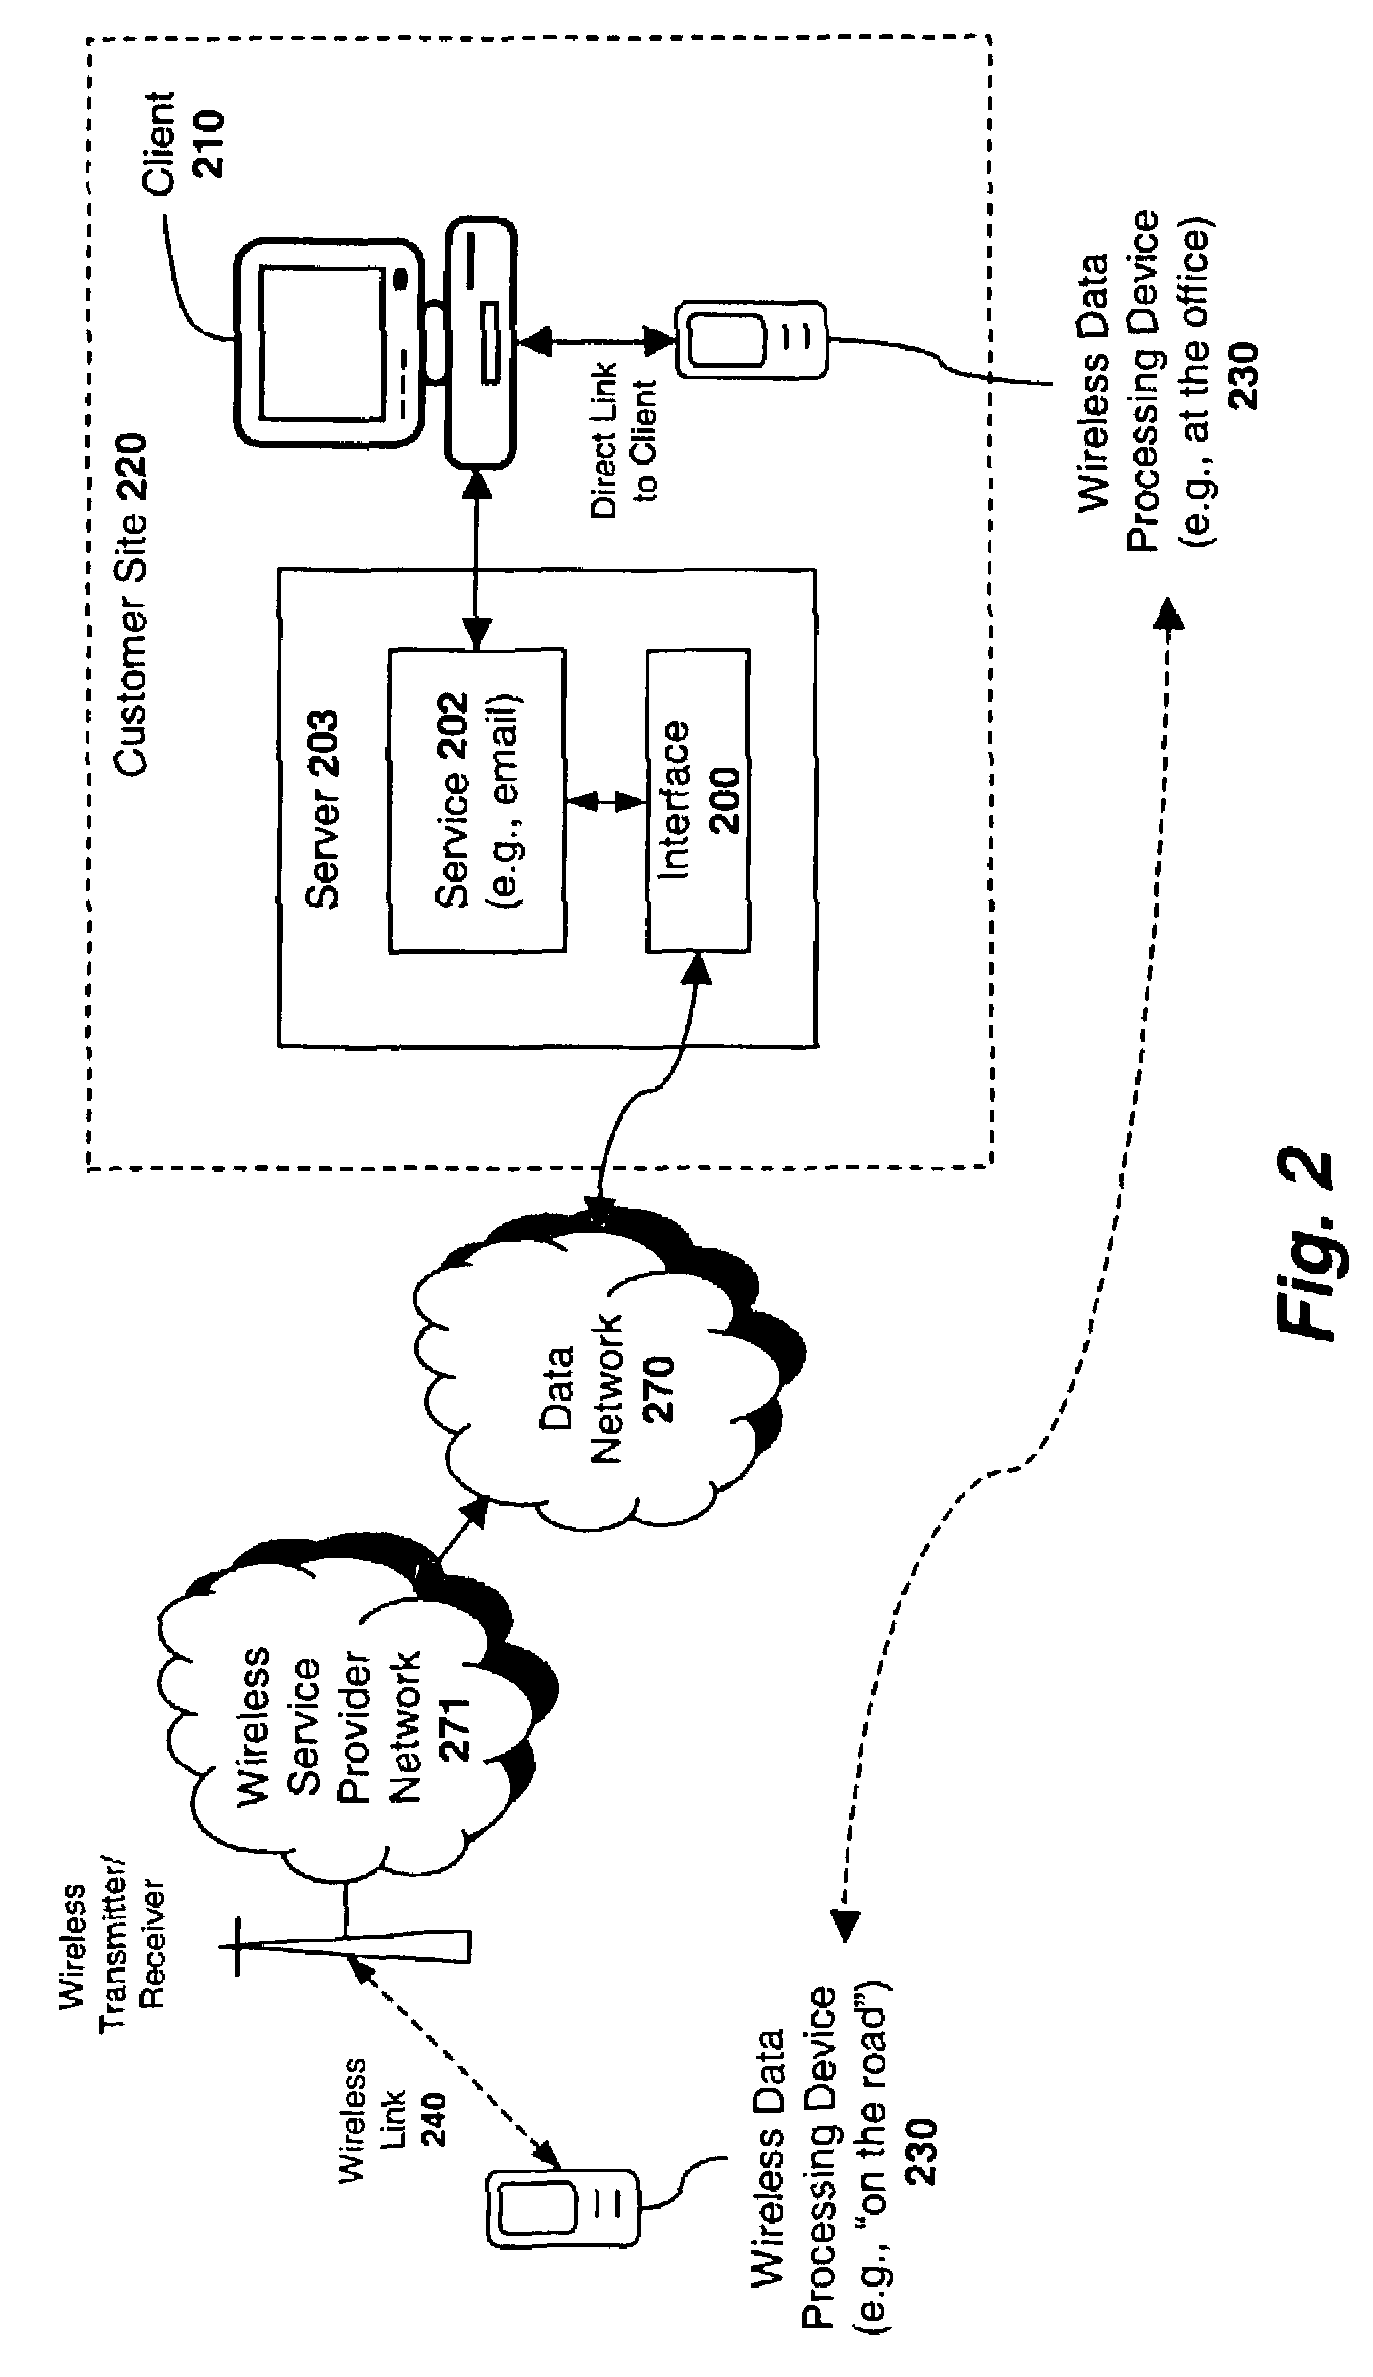 Apparatus and method for reducing power consumption in a wireless device